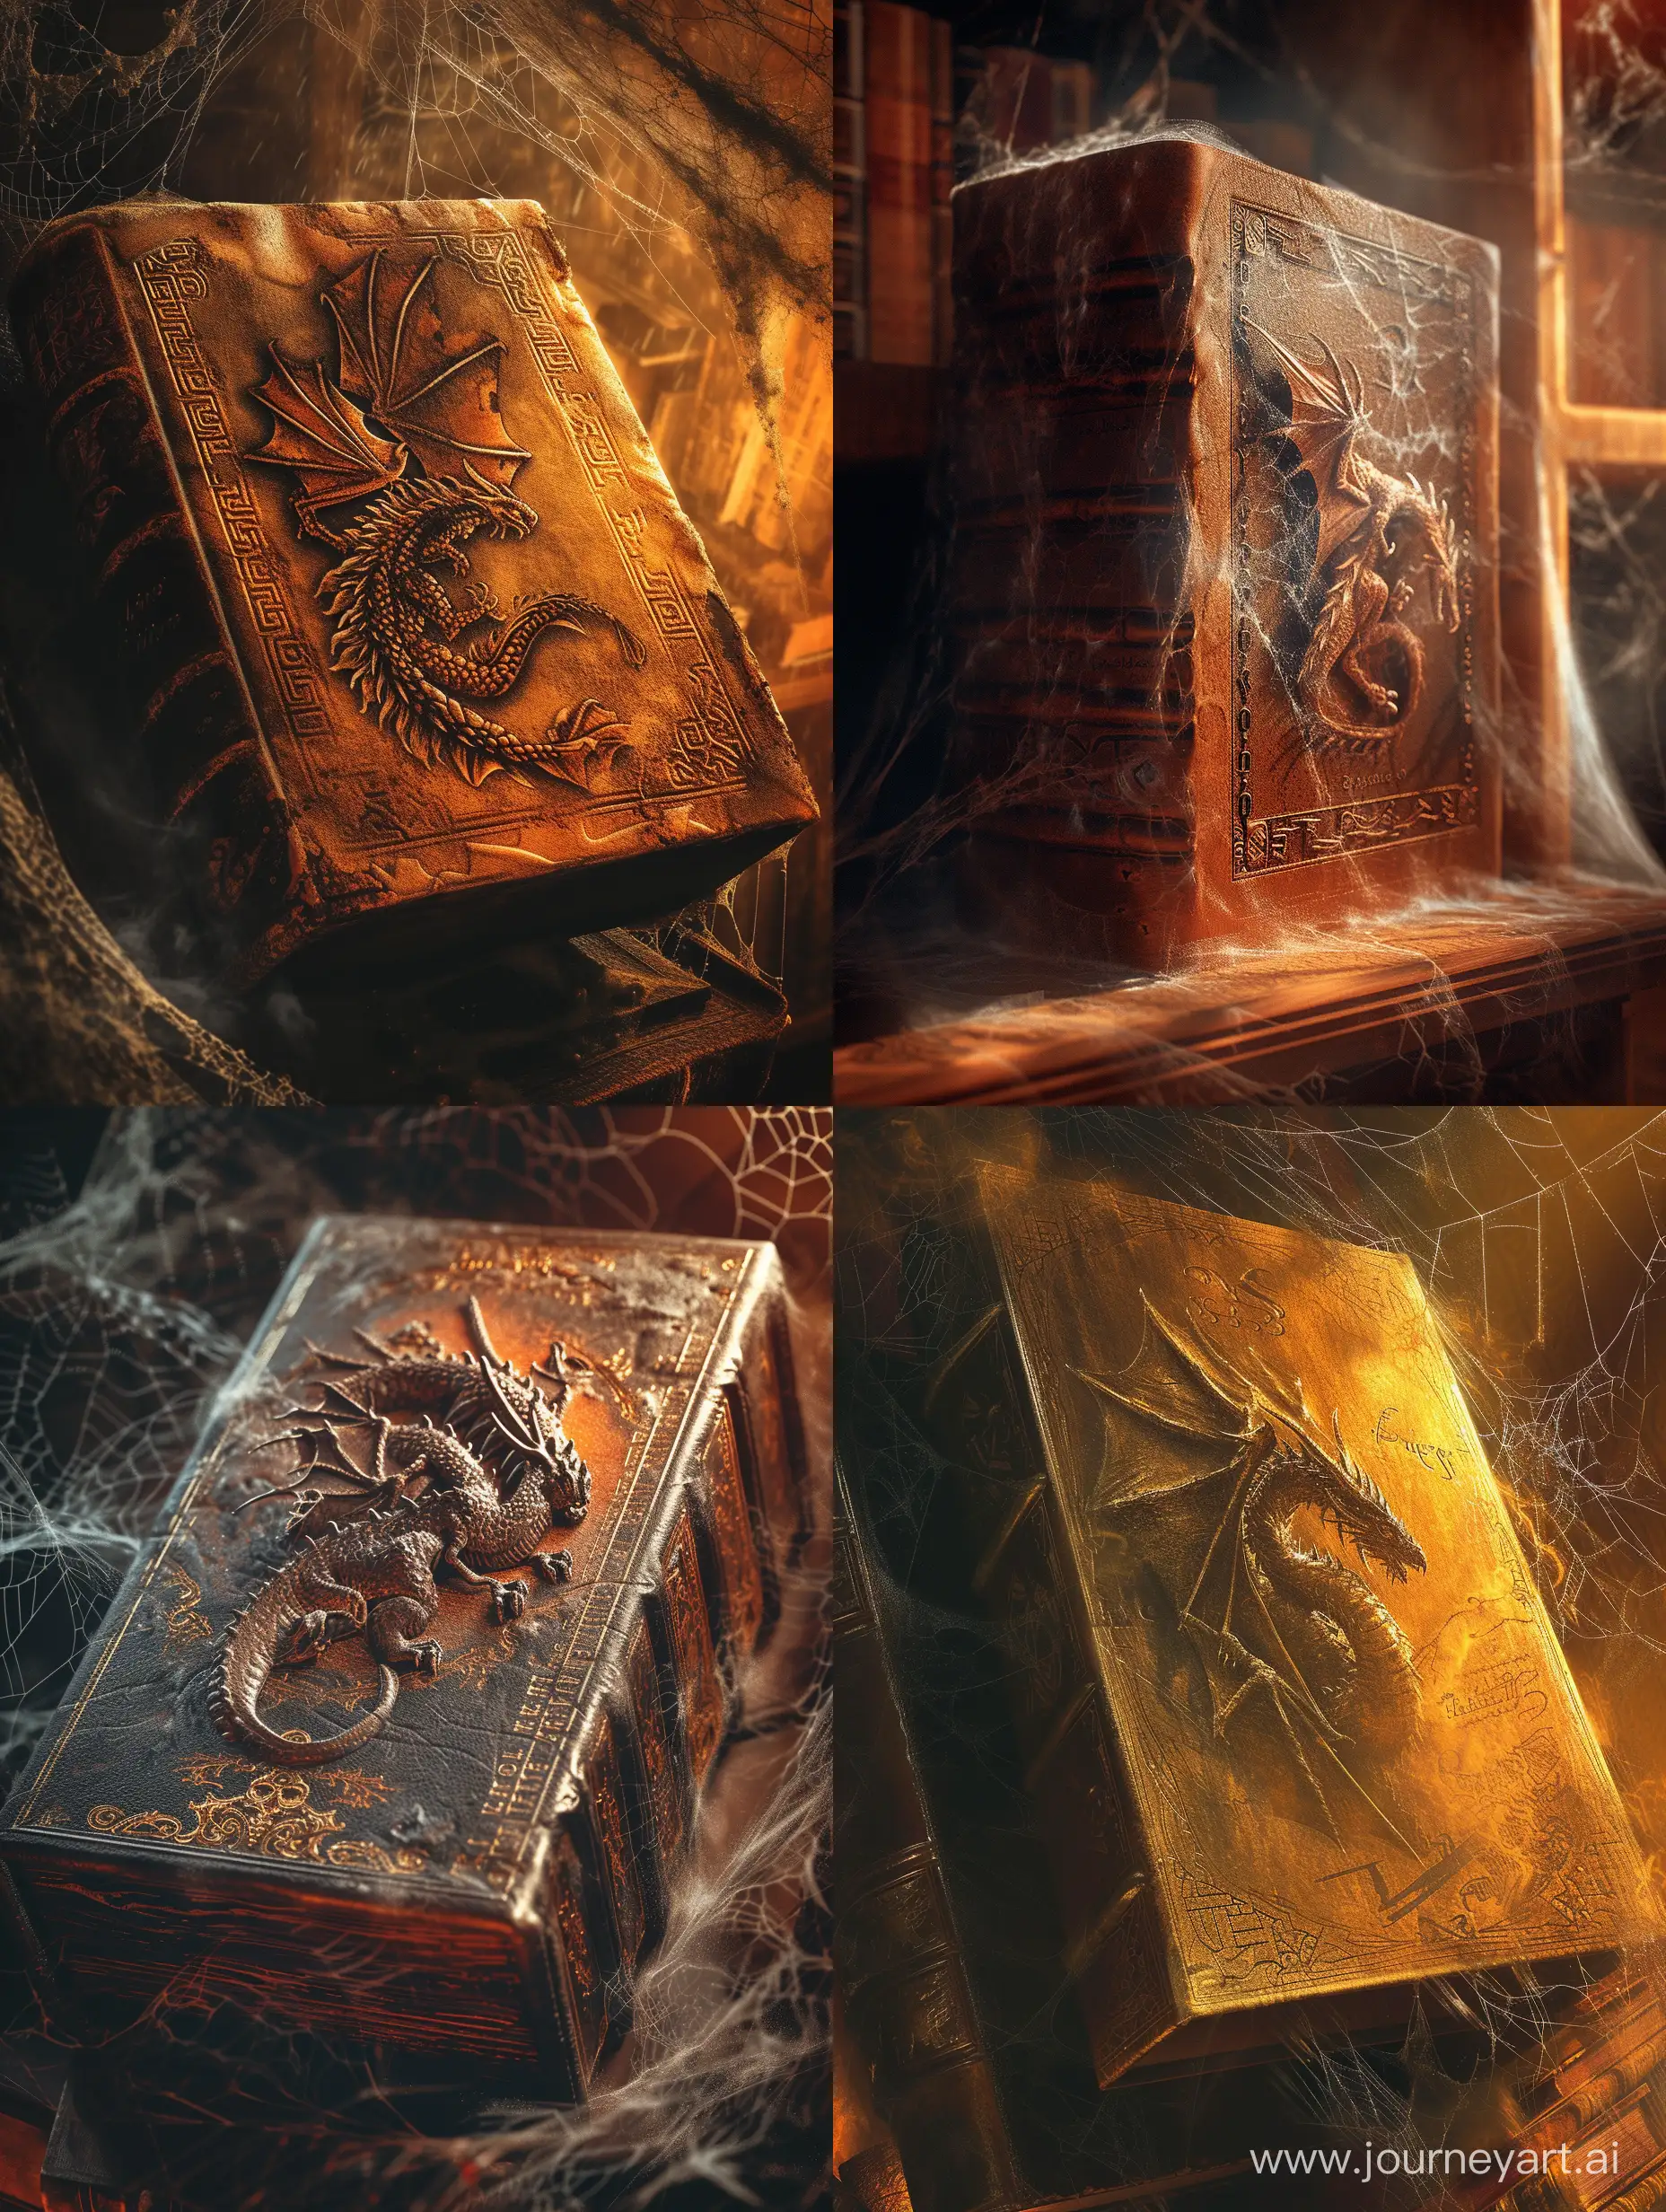 Dragonology tome,a dragon on it,in ancient library,cobwebs everywhere,leather cover,runic script,incredible detail,warm light,terrifying,Digital Art.